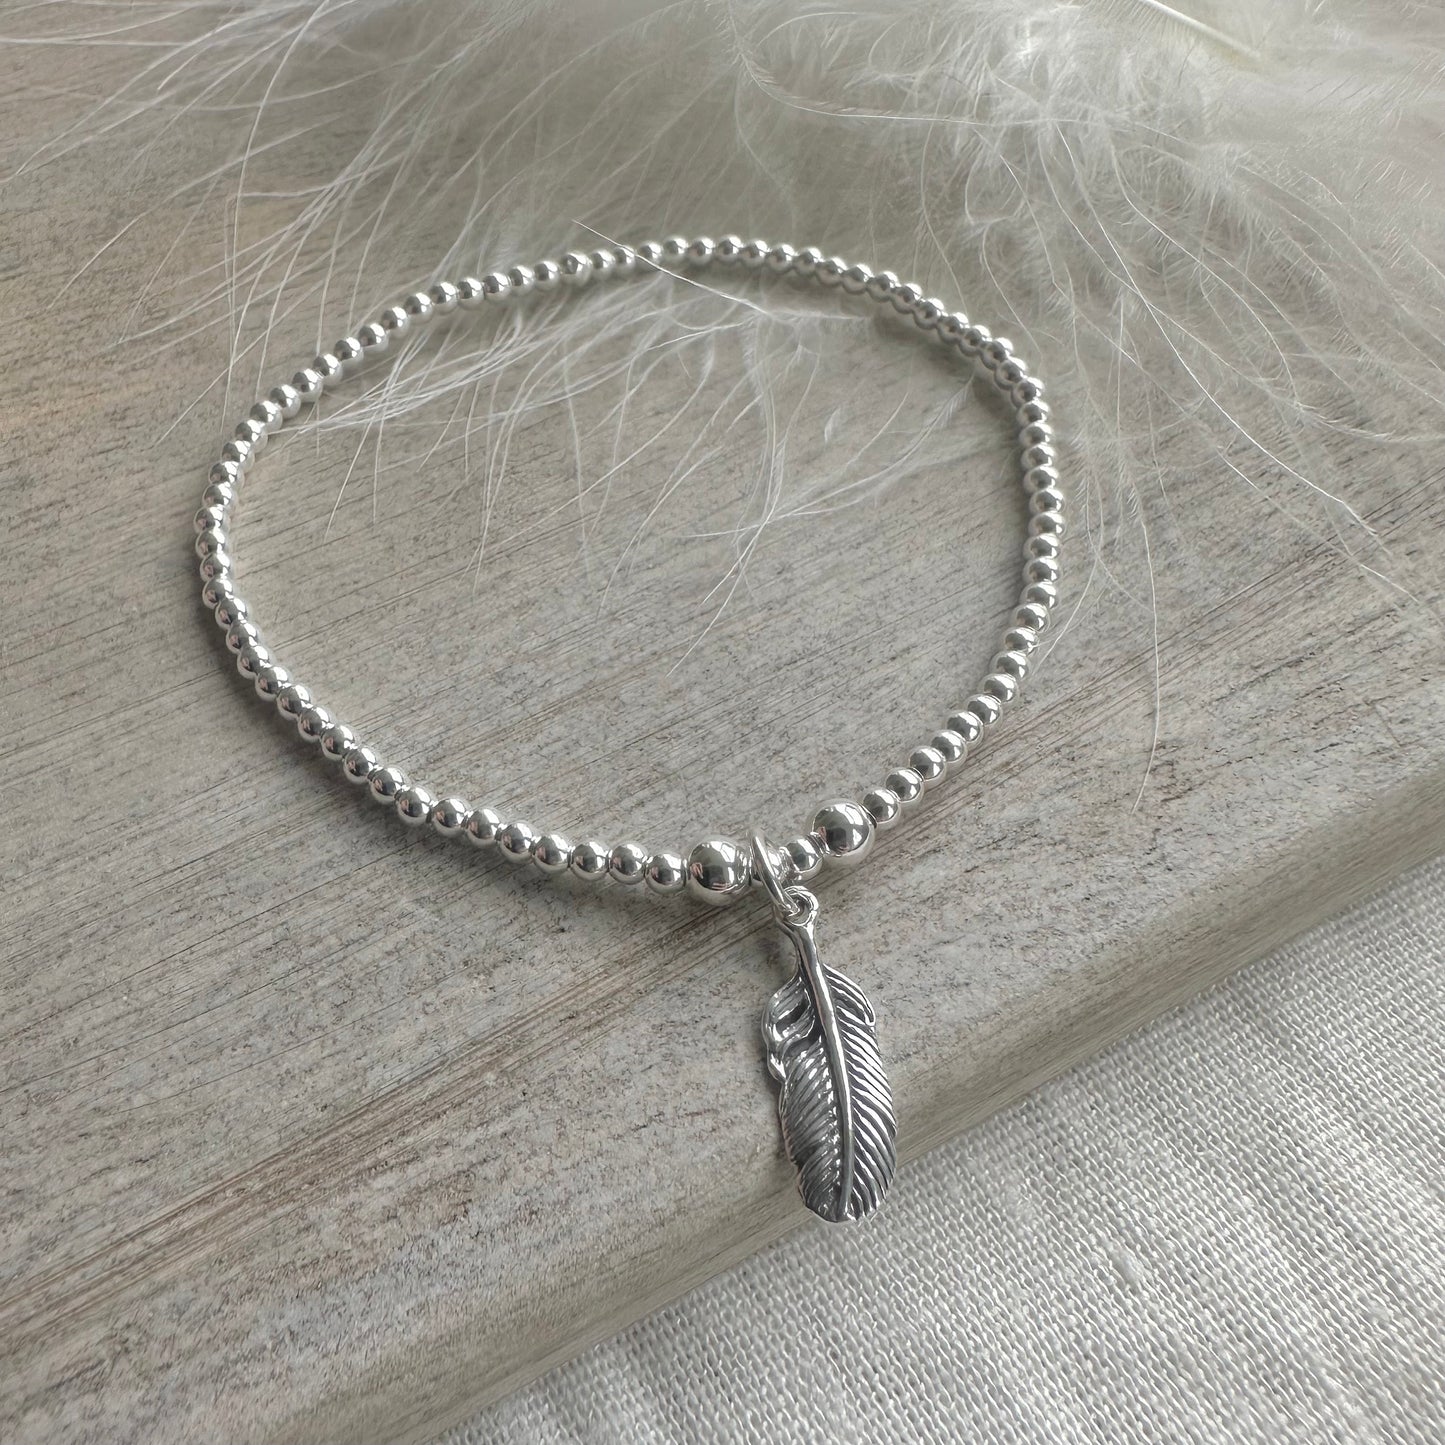 Stretch Feather Charm Bracelet, Dainty Layering Sterling Silver bracelet with feather